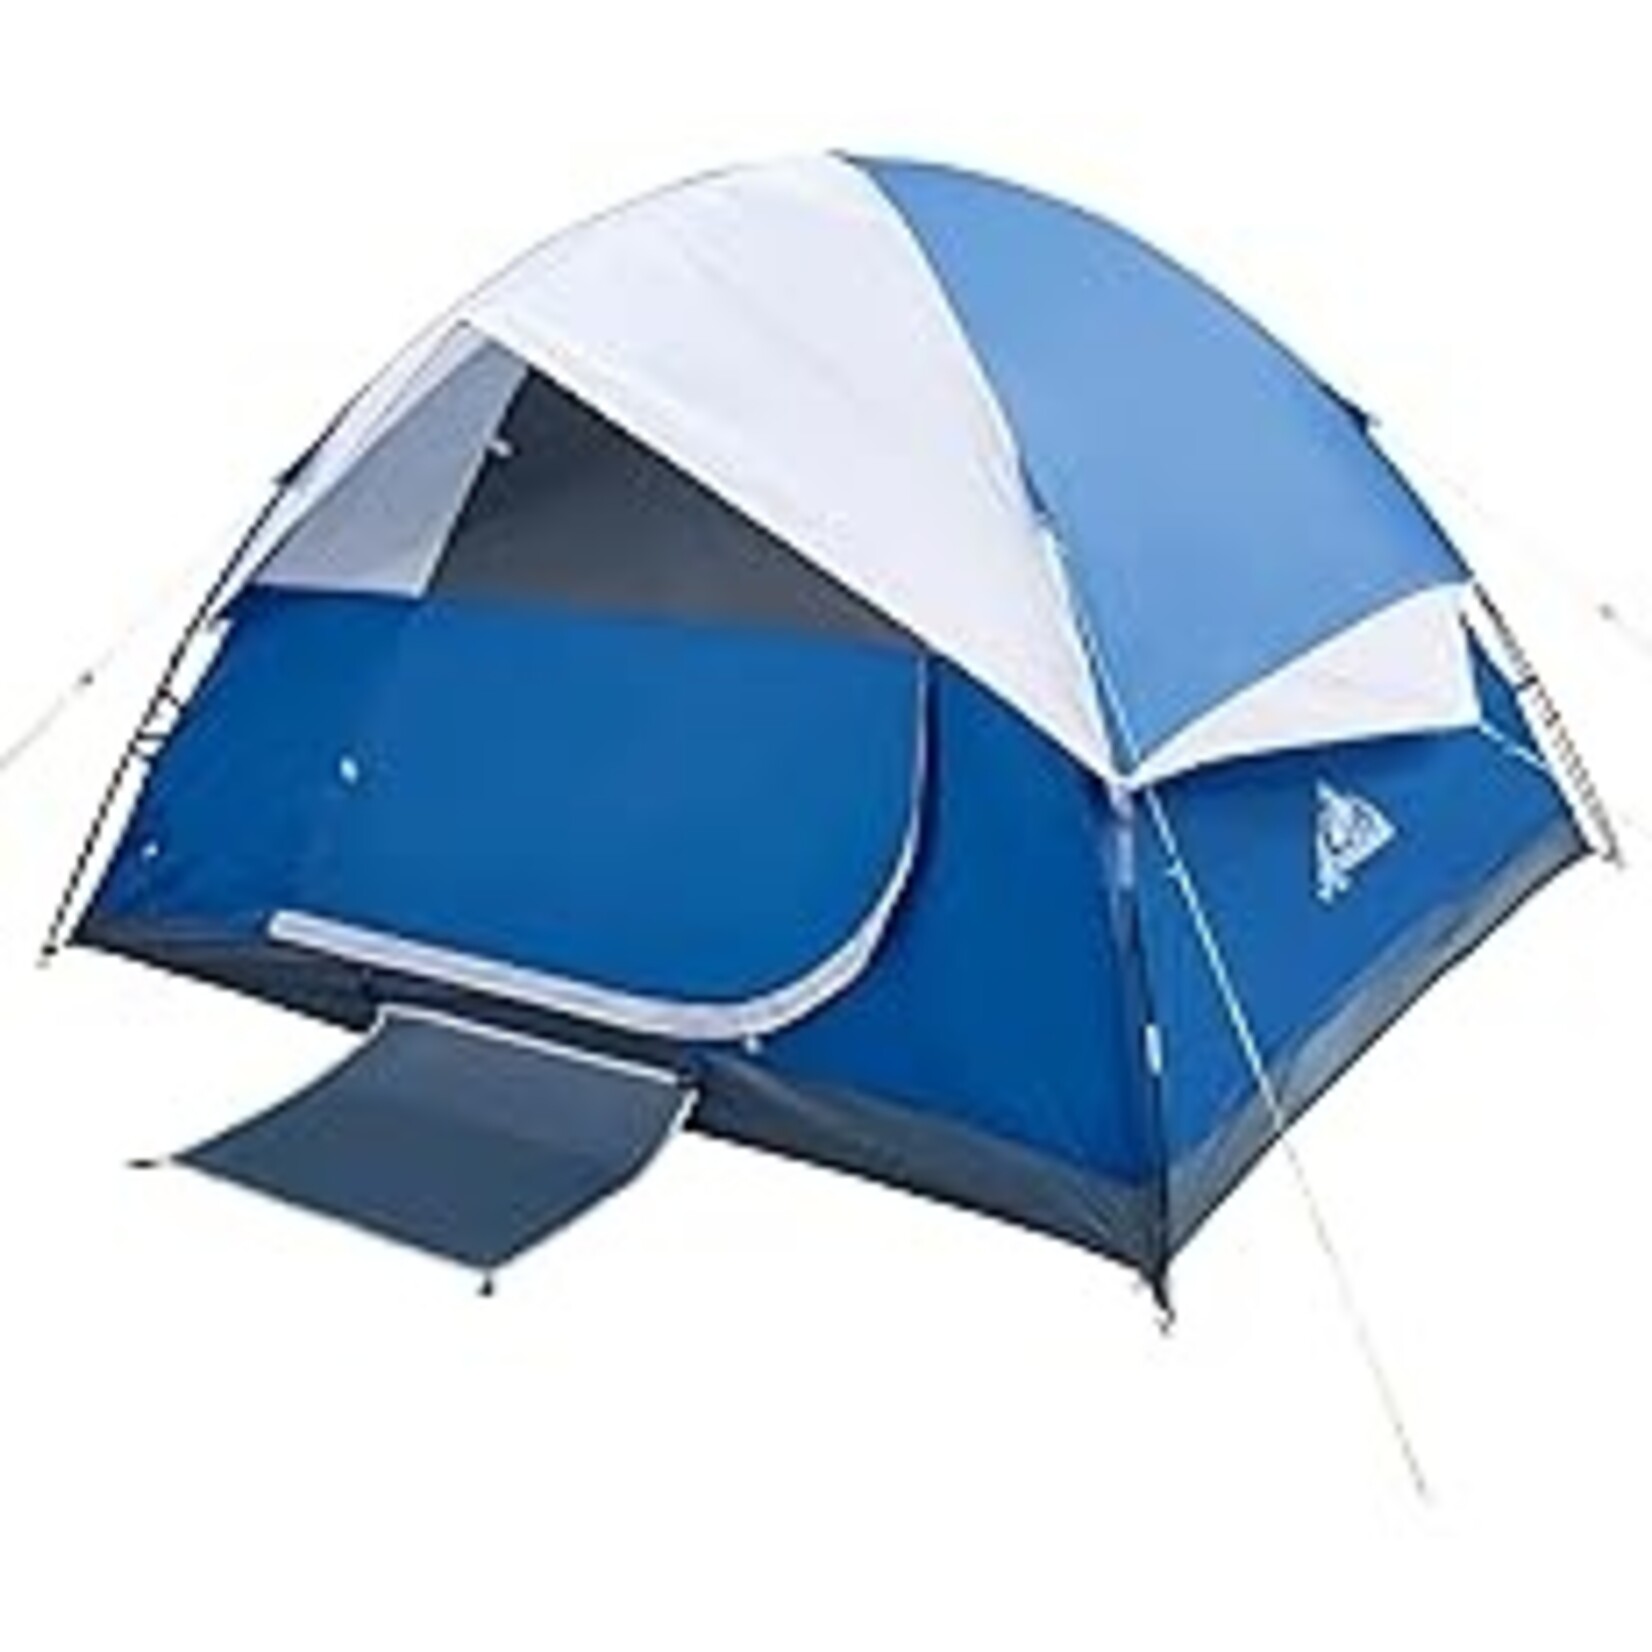 Arcadiville 6 Person Camping Tent - Blue